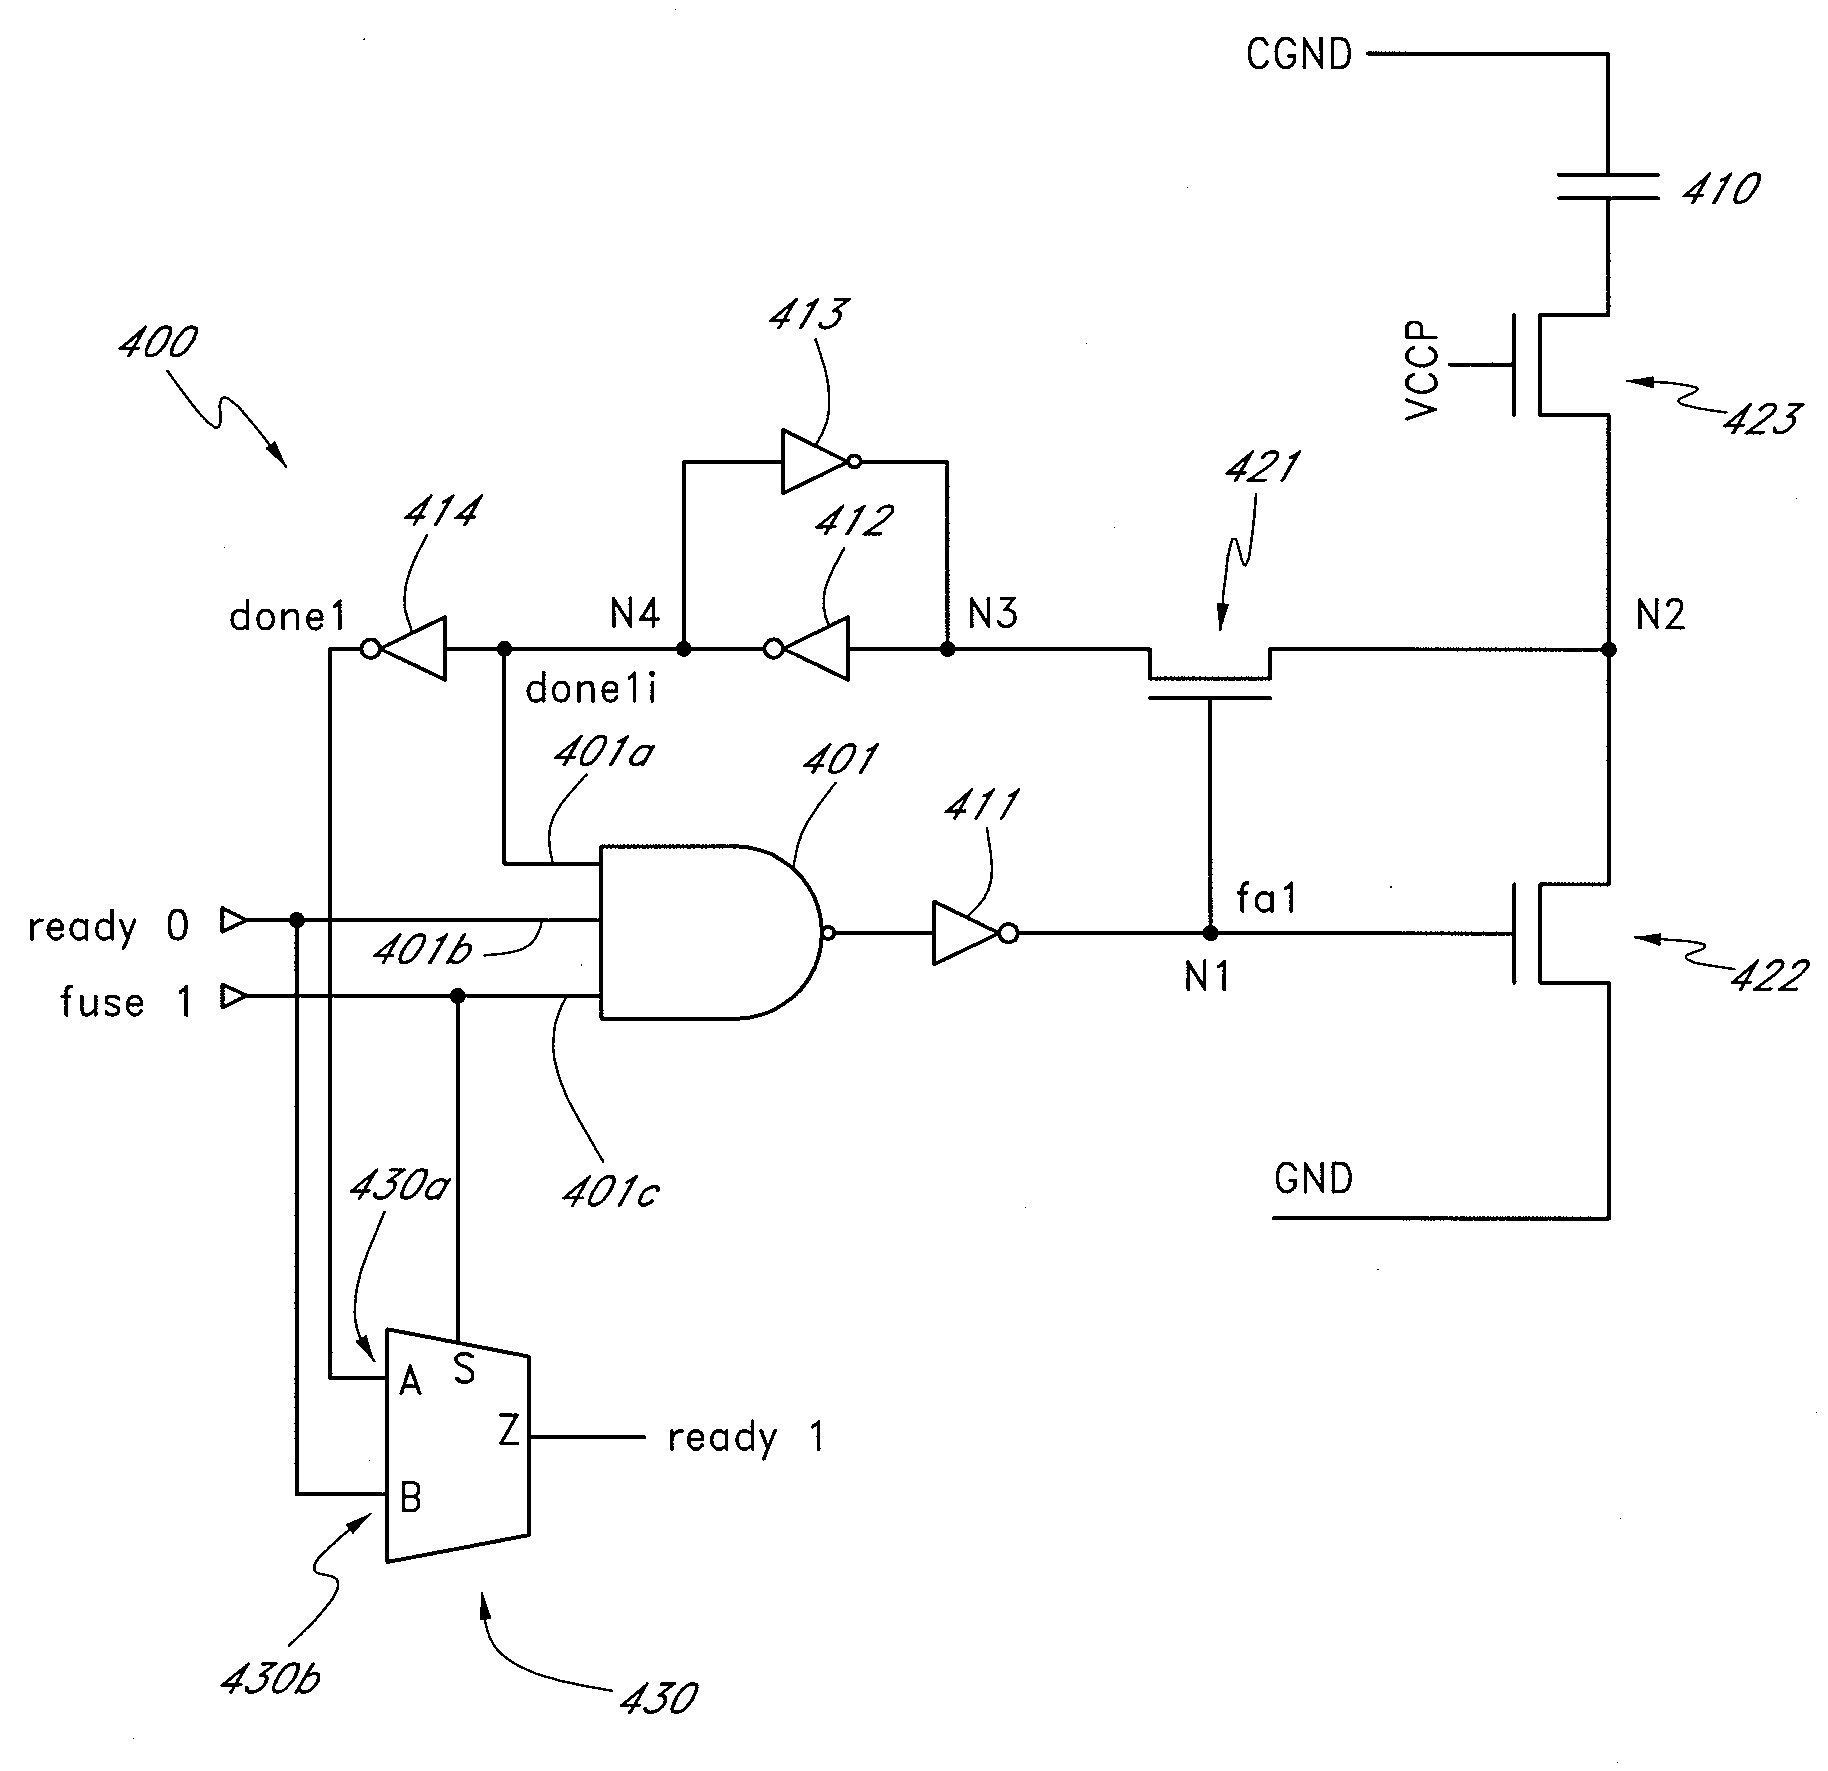 Serial system for blowing antifuses